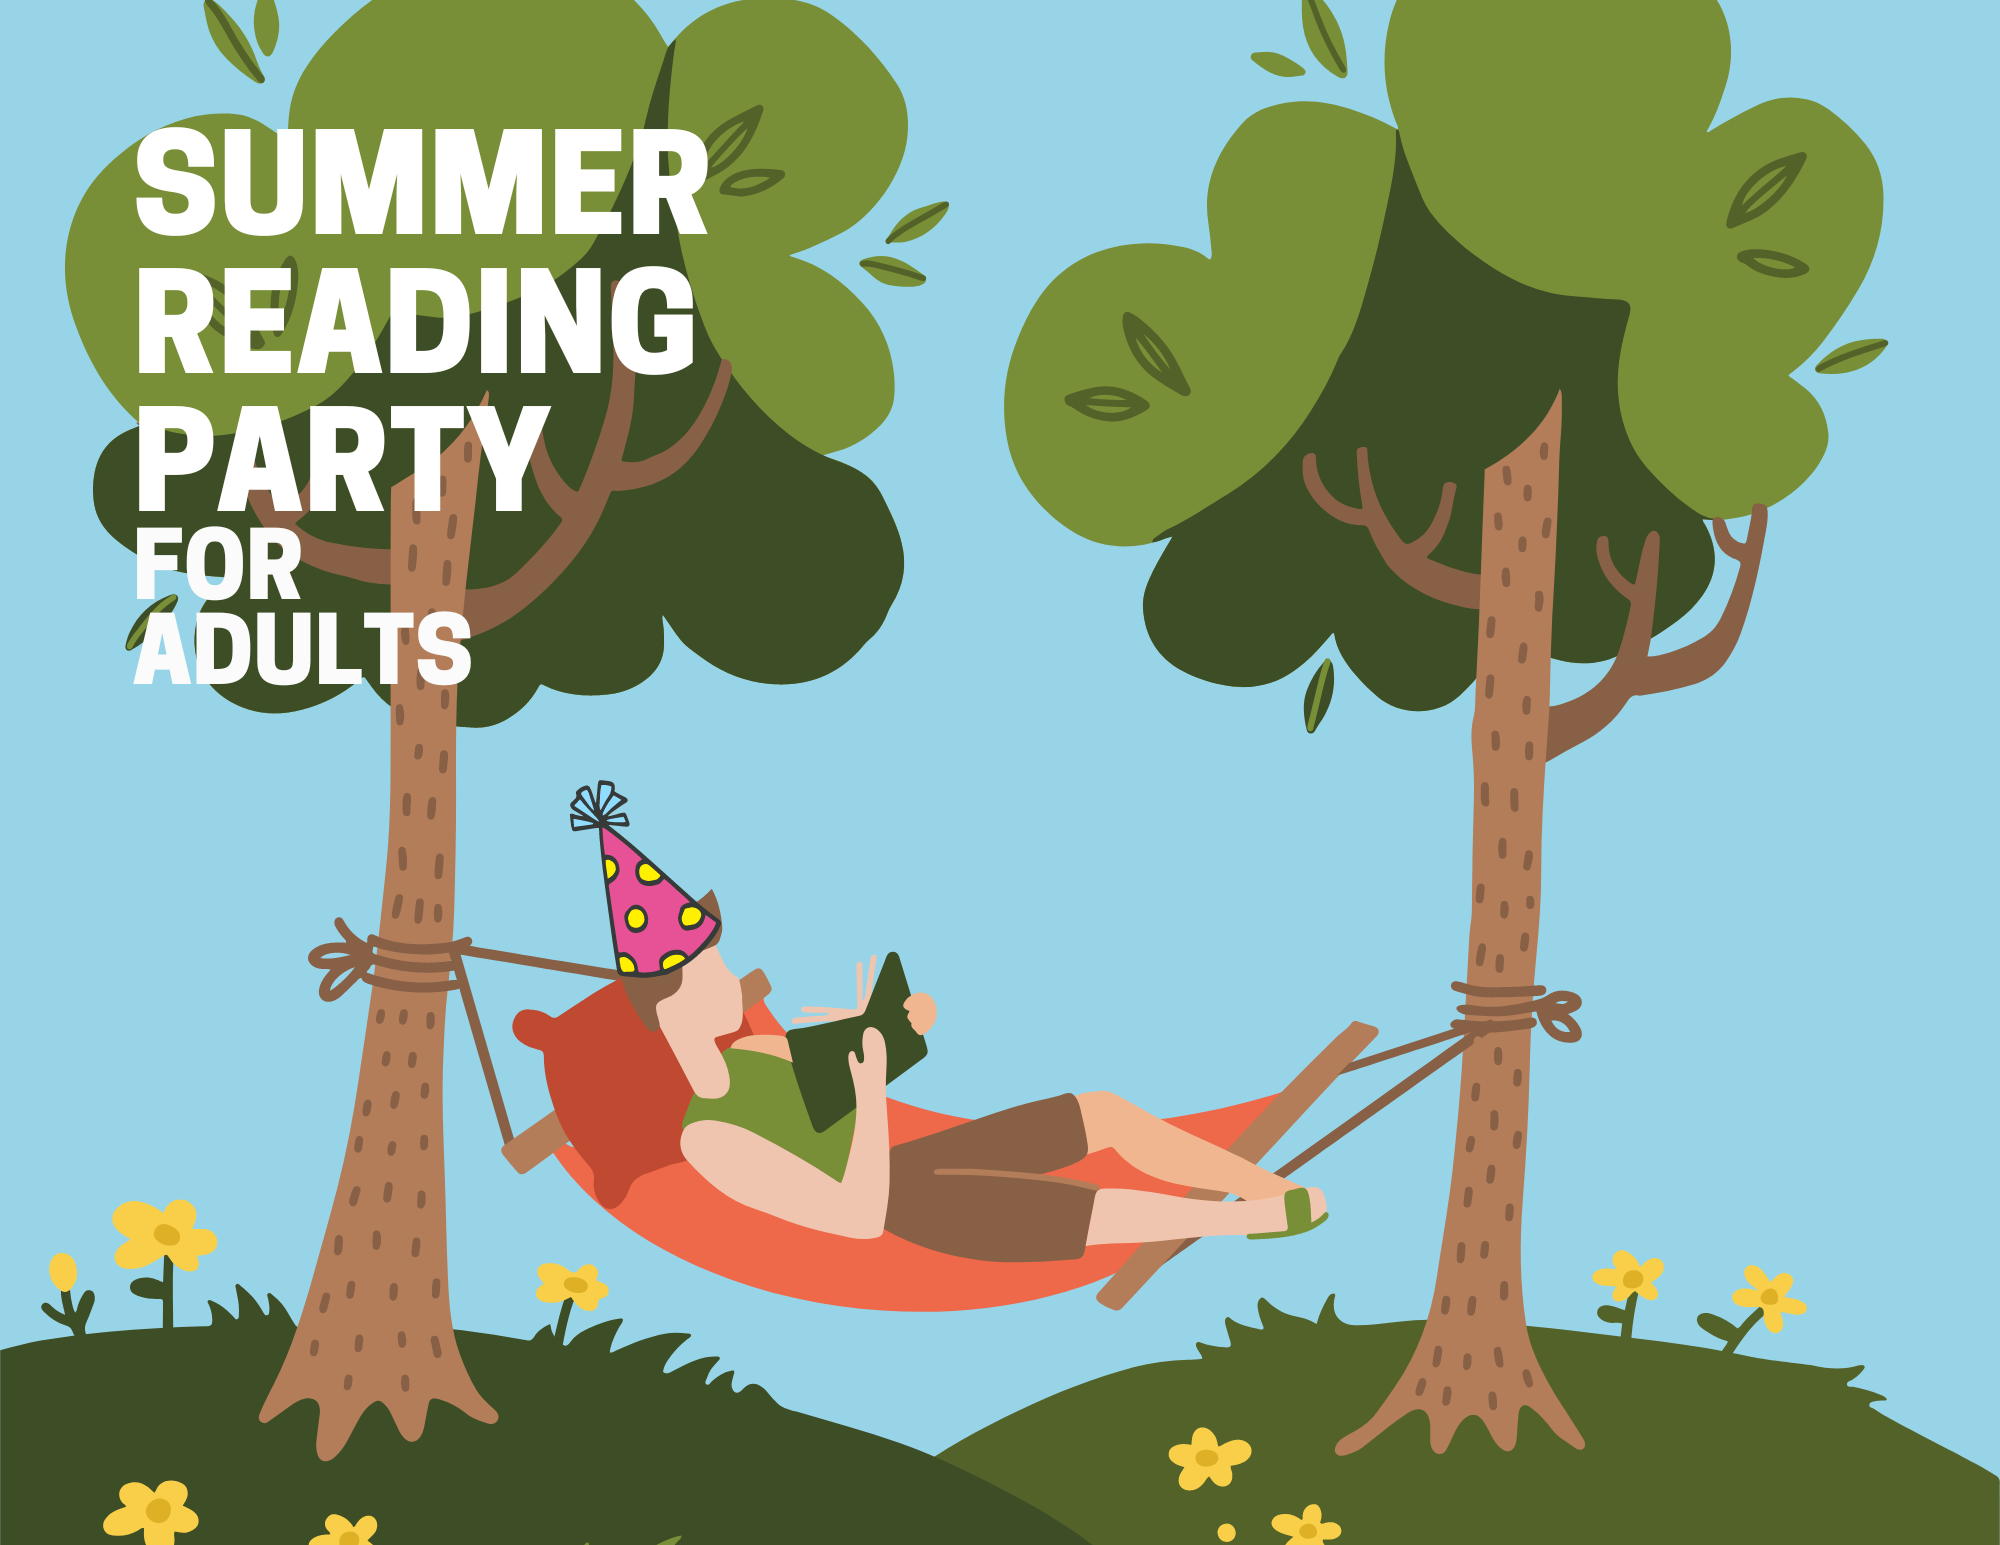 Image with a person wearing a party hat while reading in a hammock 